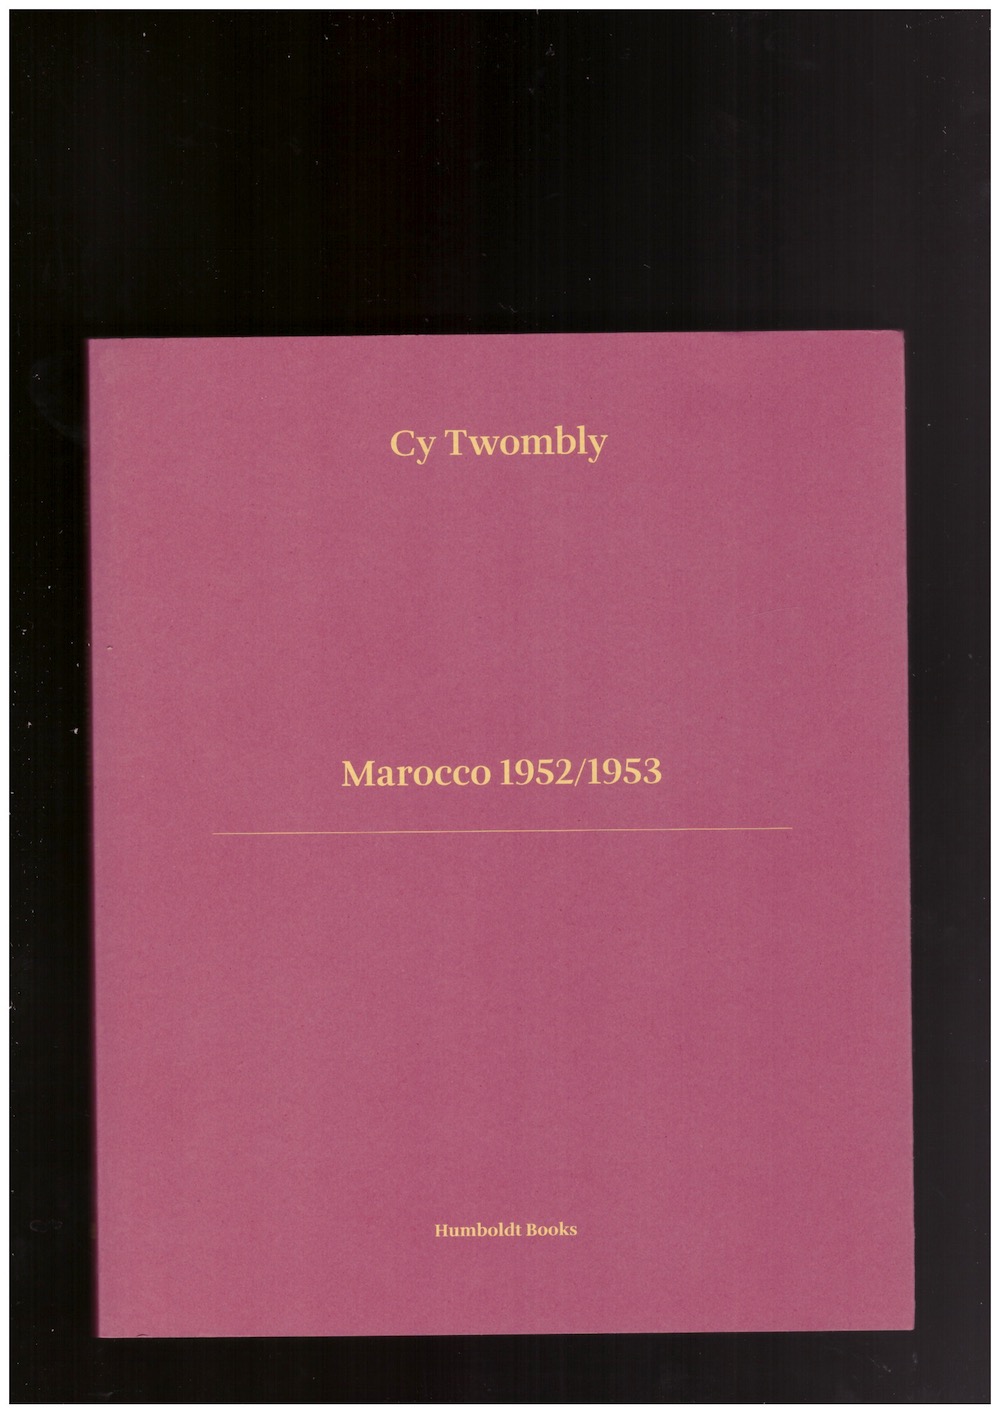 TWOMBLY, Cy - Marocco 1952/1953